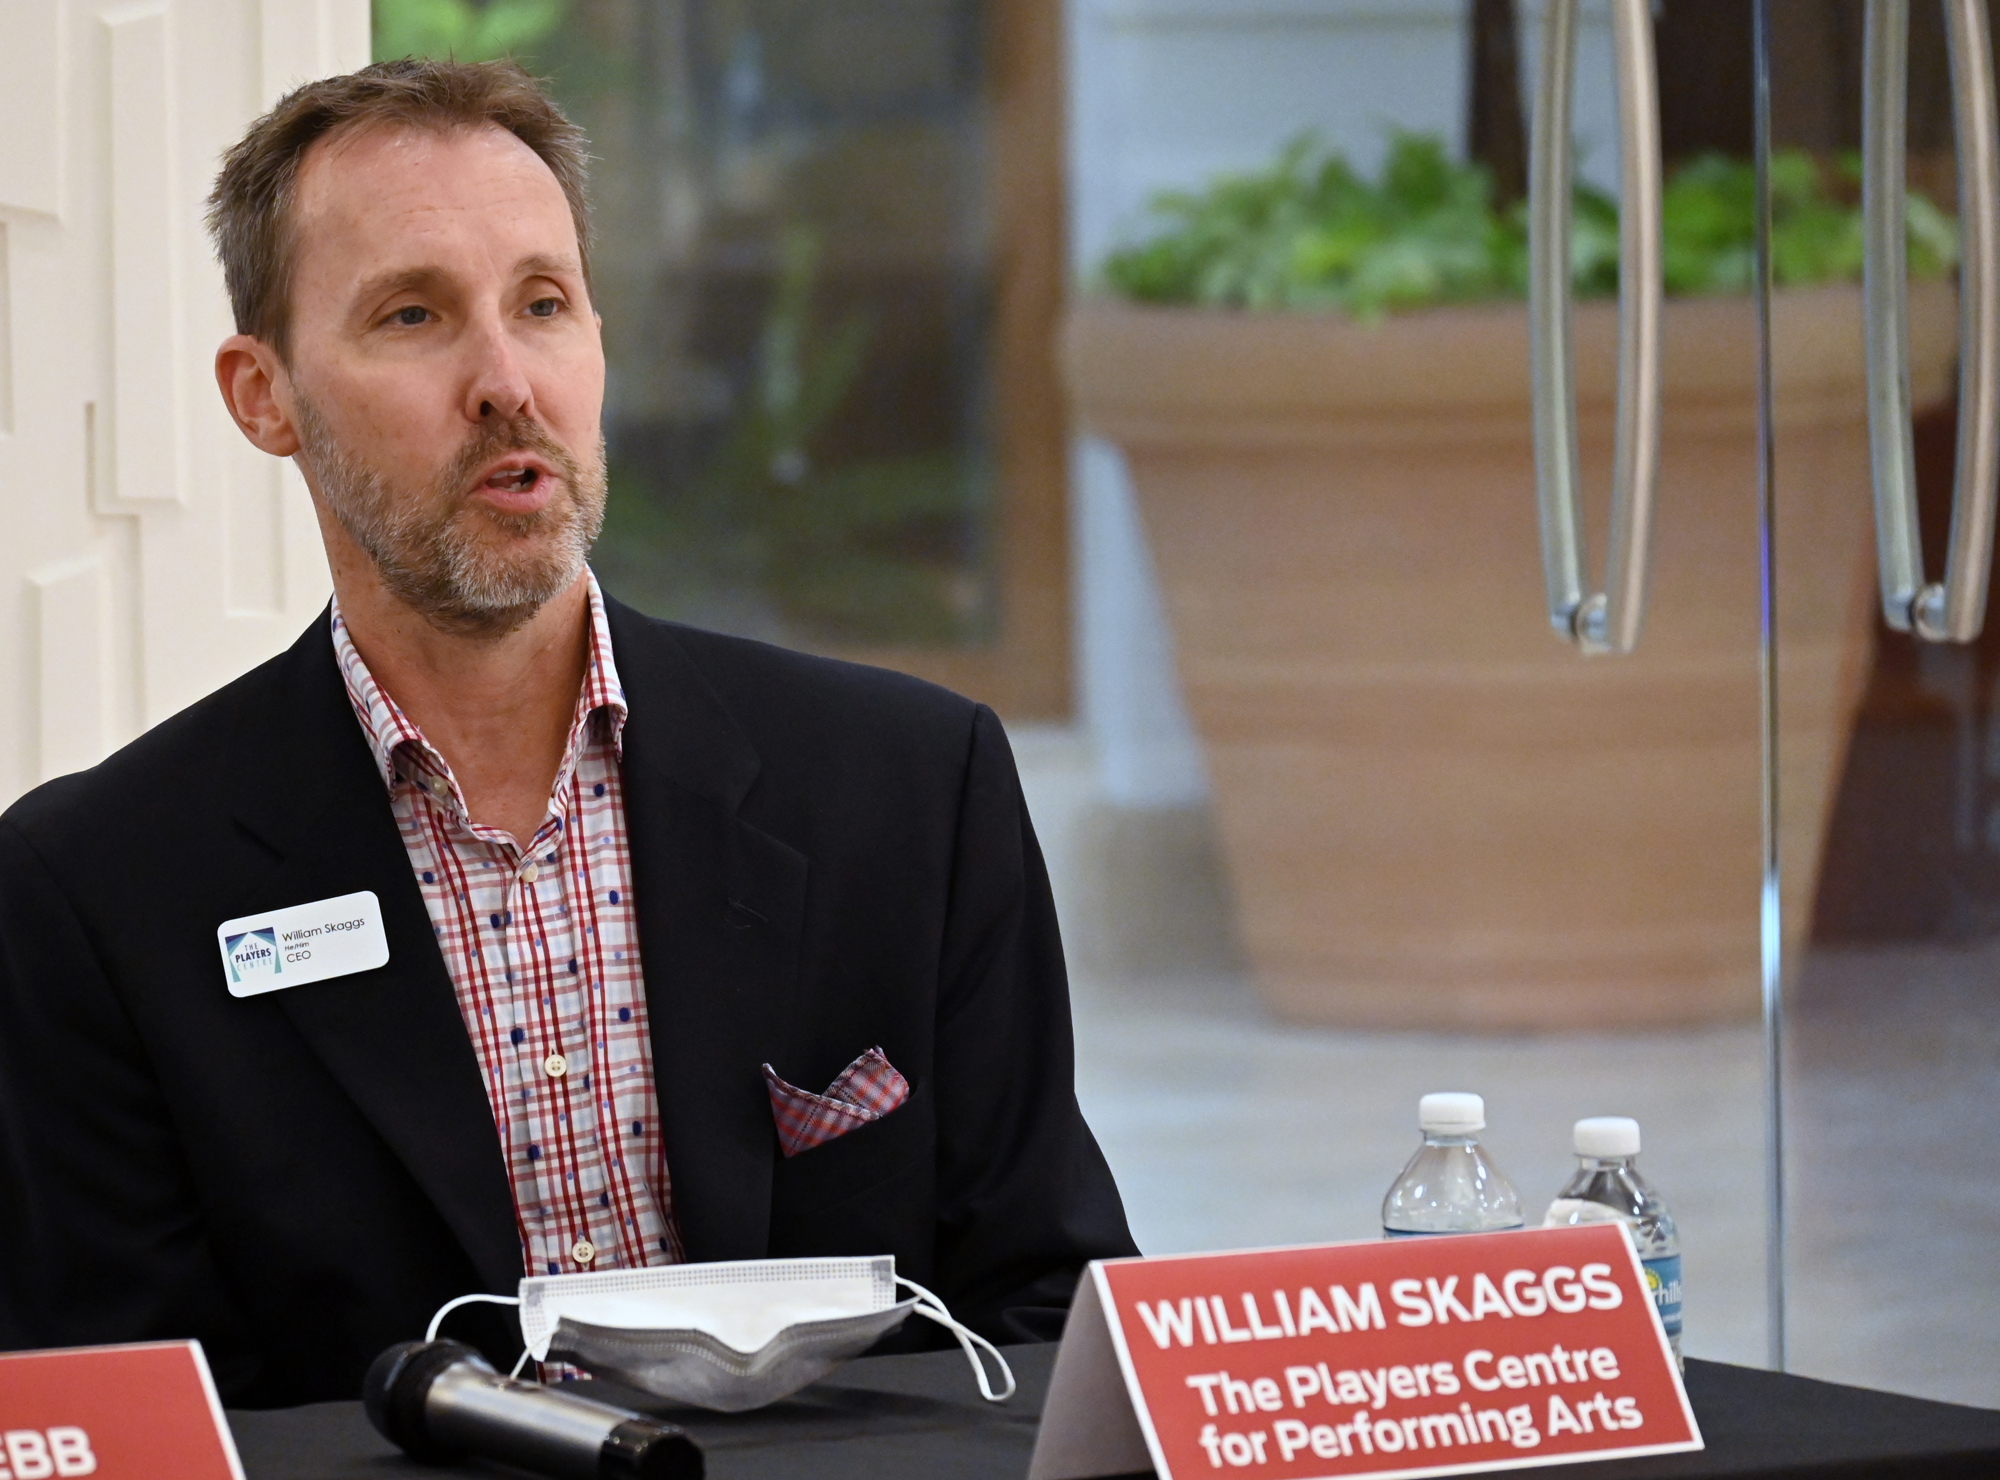 William Skaggs talked a bit about the local performance culture in Sarasota. (Photo: Spencer Fordin)